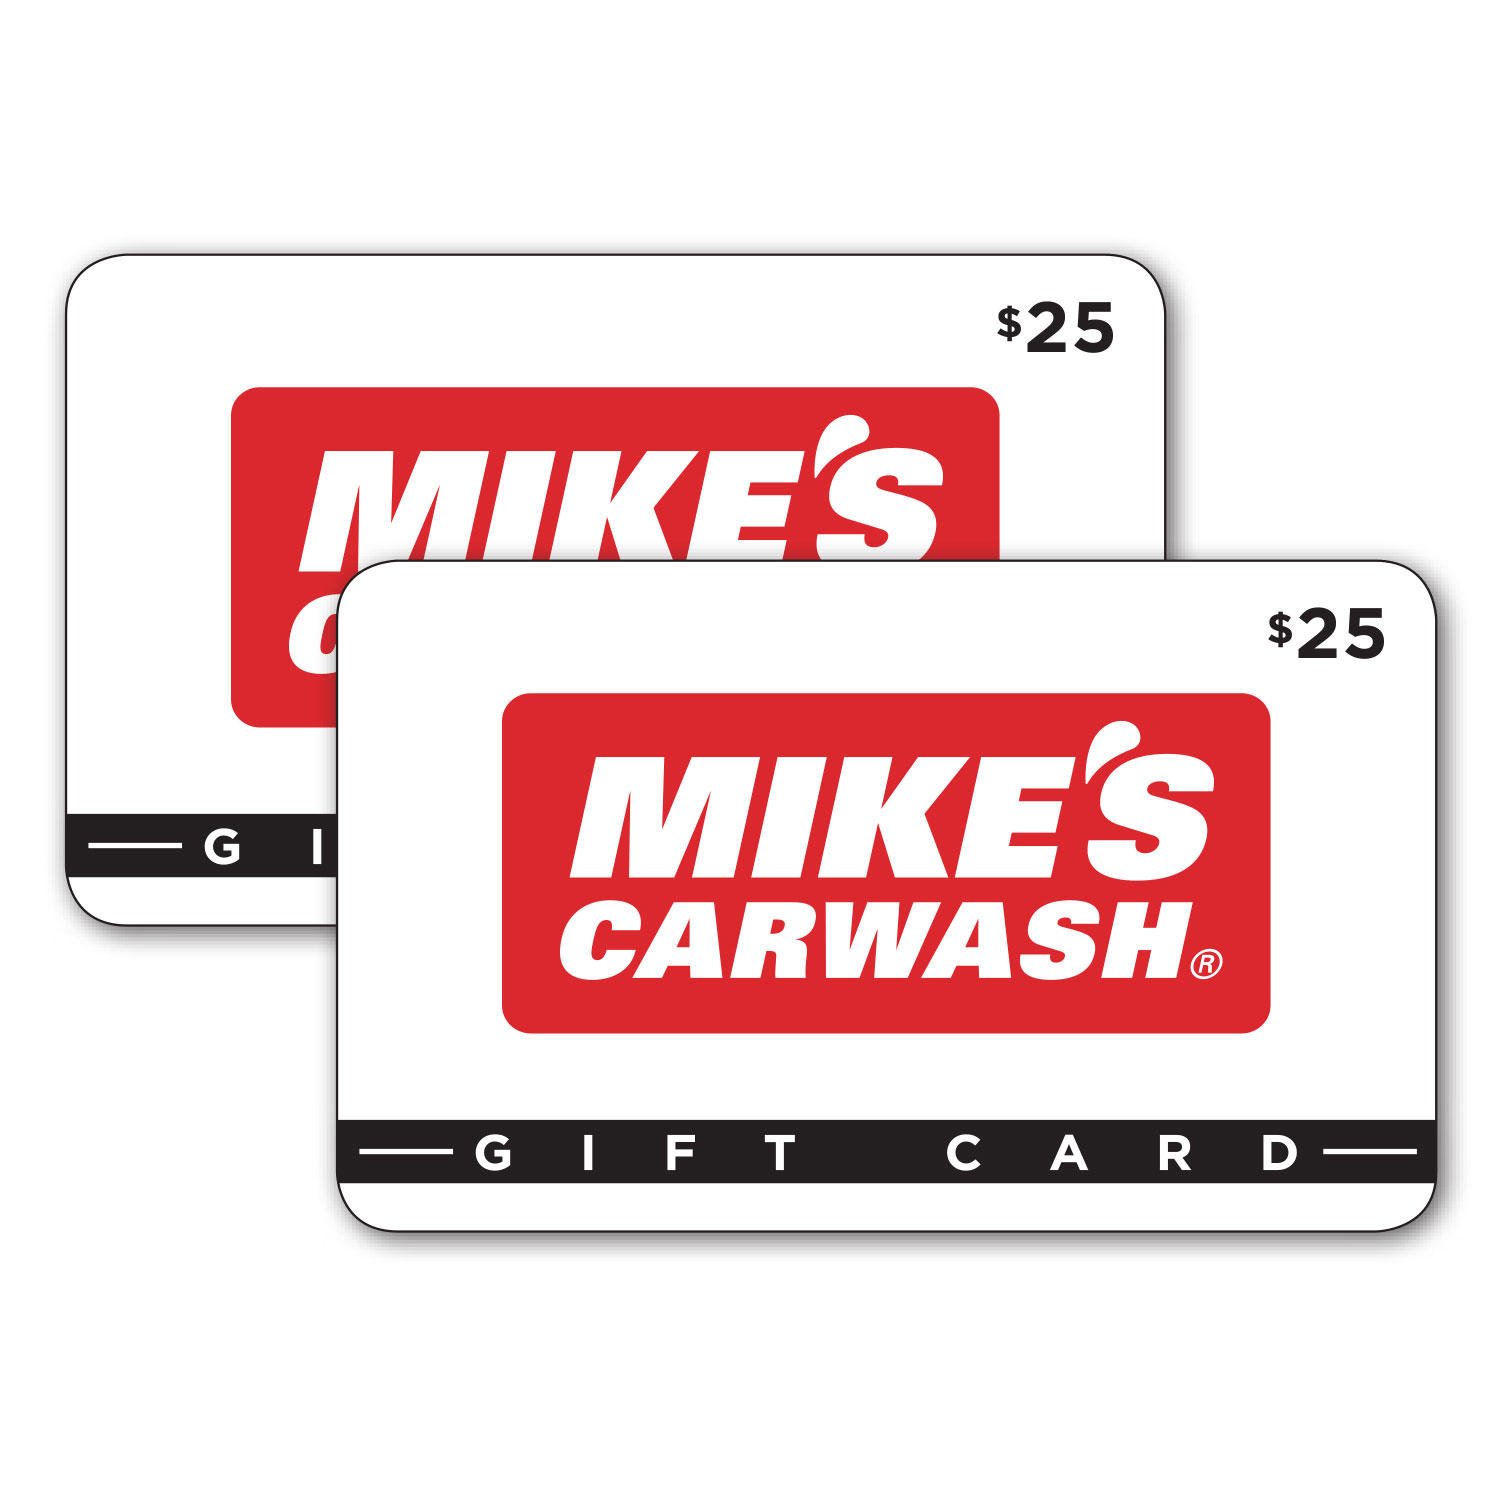 Mike's Carwash $50 Gift Cards - 2 x $25